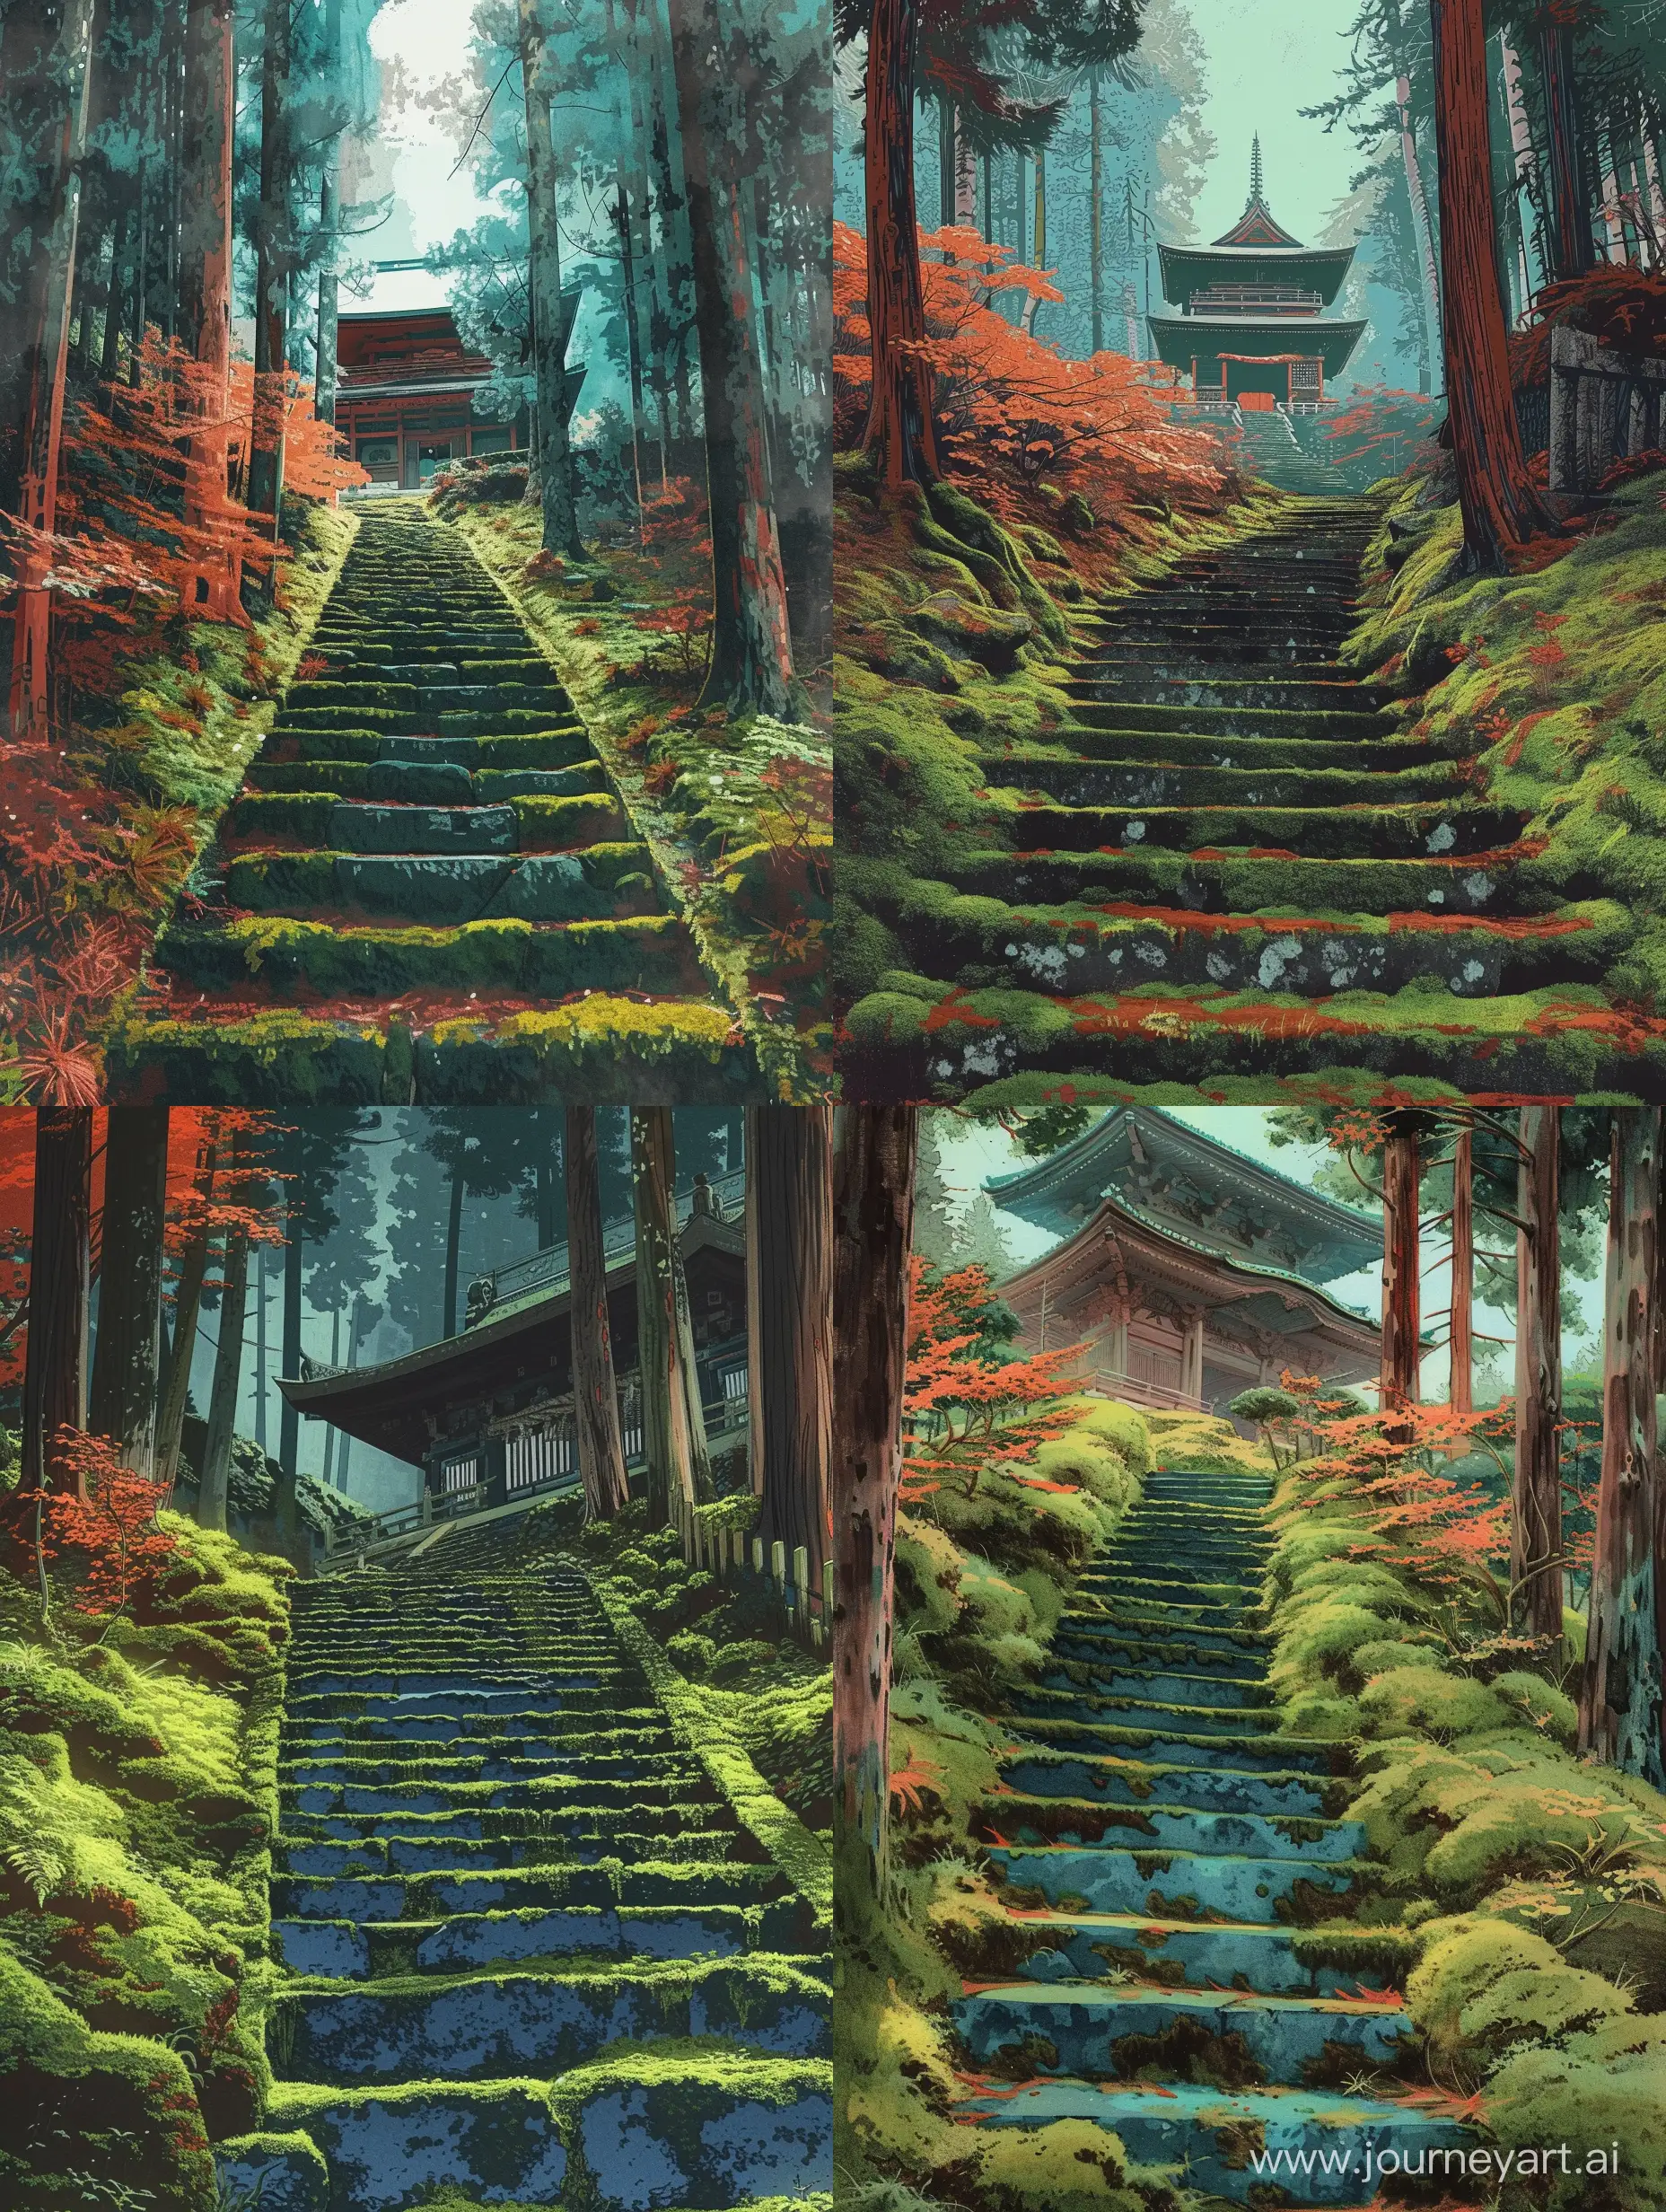 Mossy-Staircase-Ascending-to-Japanese-Temple-in-Spruce-Forest